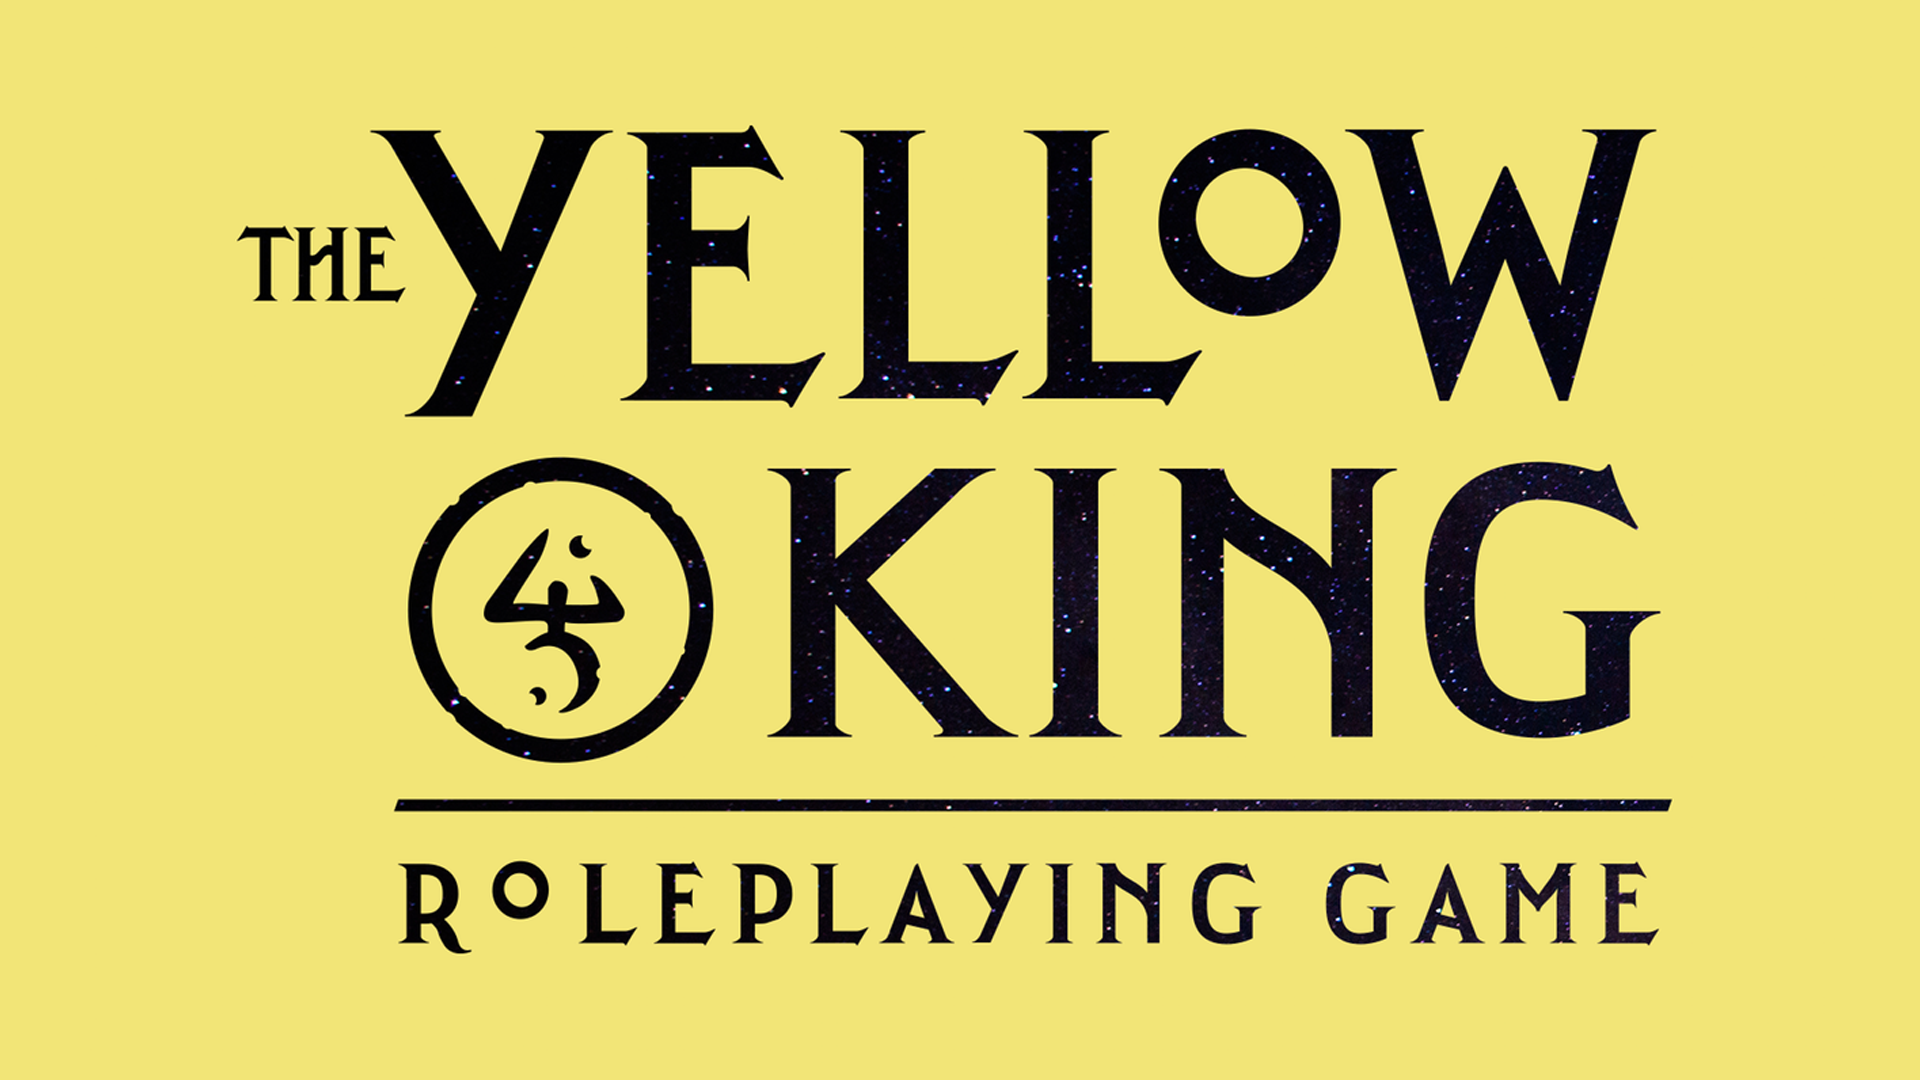 The Yellow King RPG cover art.